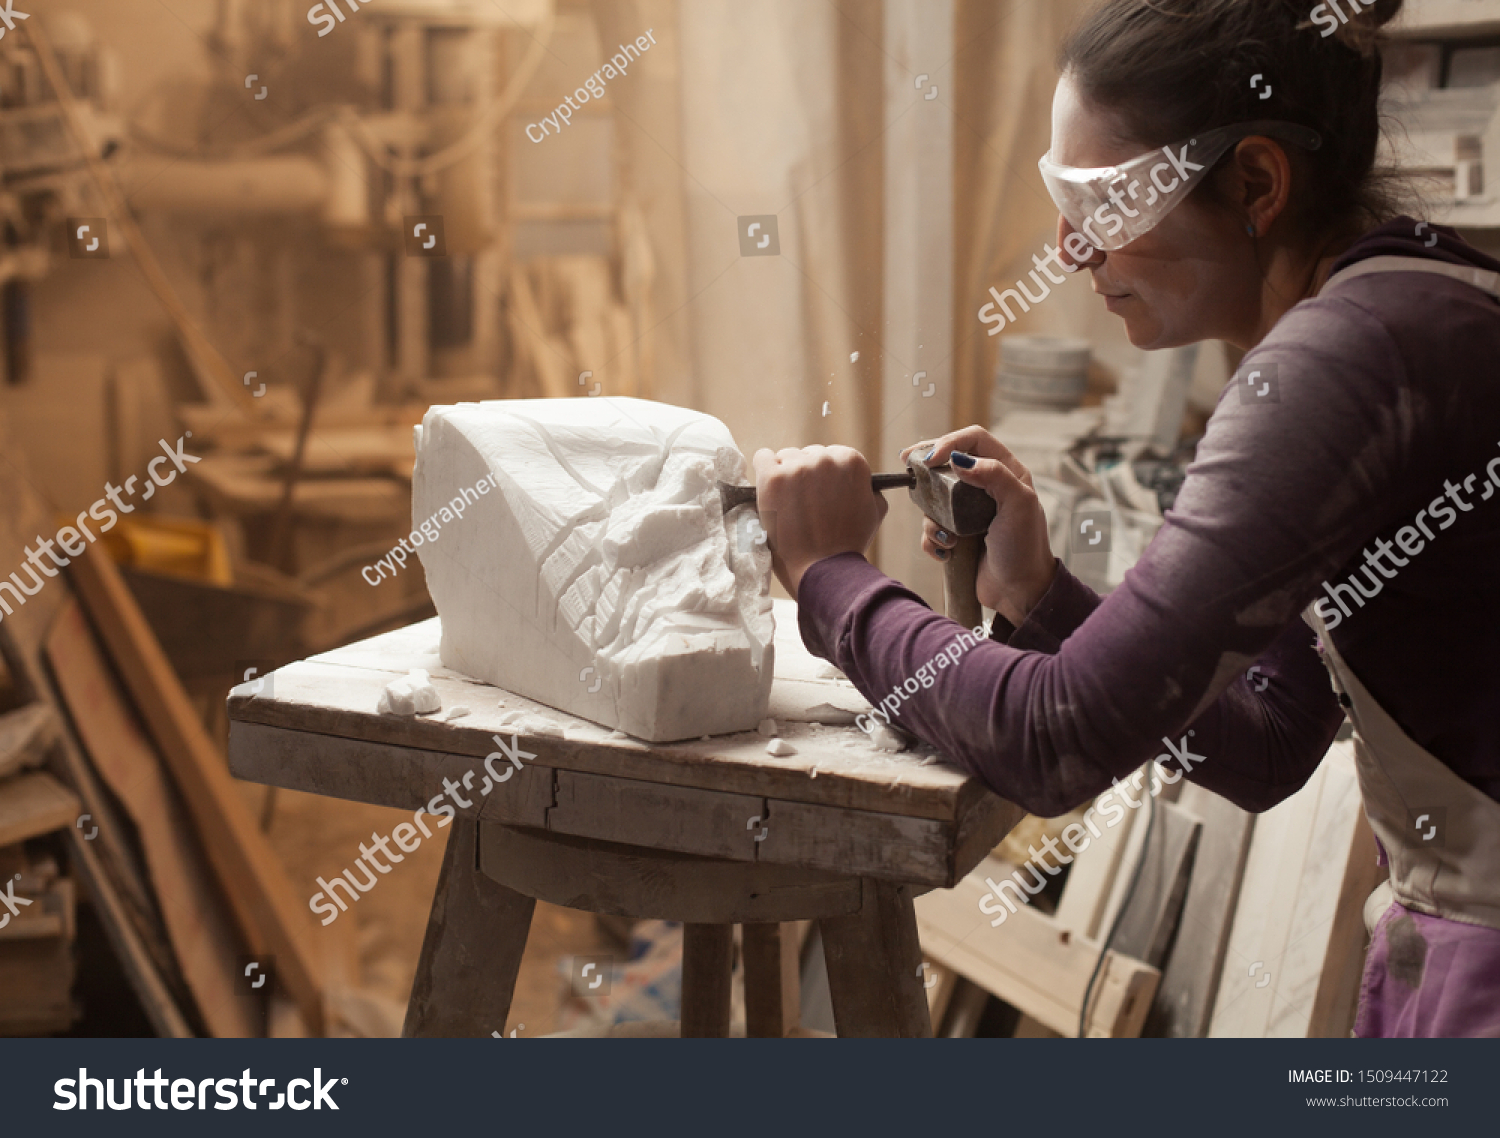 Female sculptor at work in a workshop, using hammer and chisel to sculpt a piece of white marble stone, debris and particles flying around, stonemasonry and stonecraft, copy space #1509447122